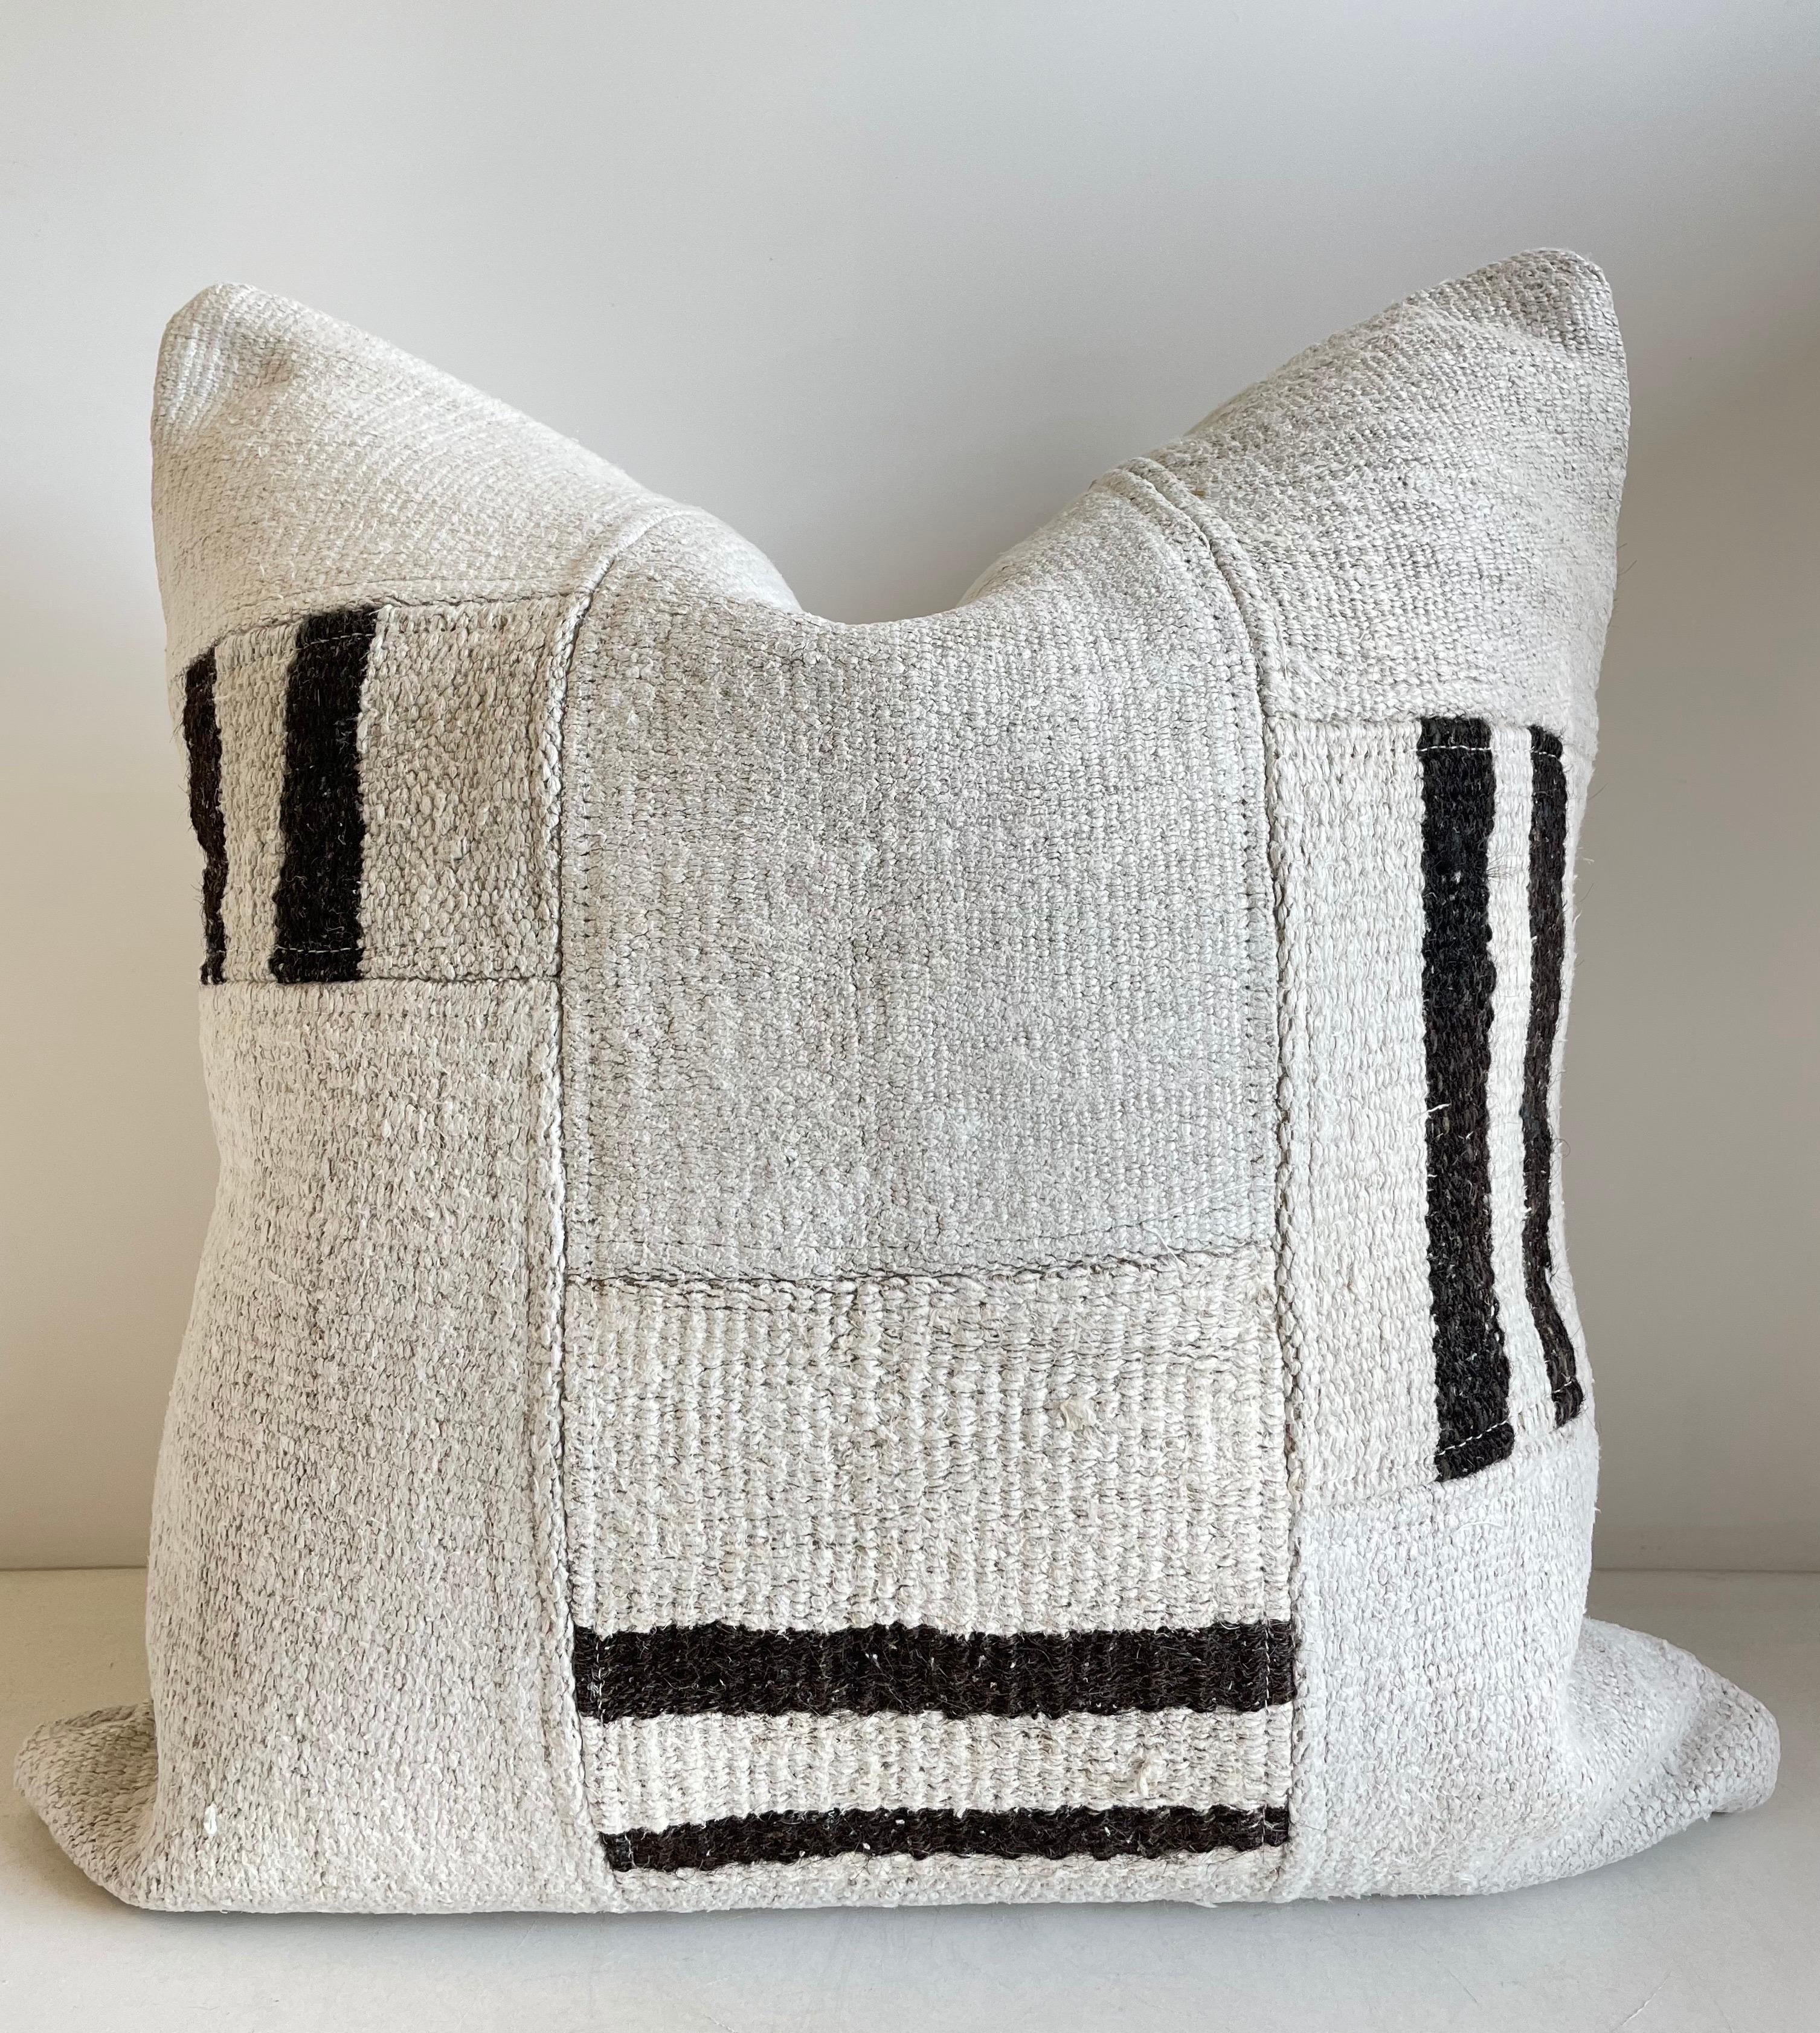 Creamy white hemp rug patchwork style pillow. Unique patchwork pillow has been made with parts of different Turkish rugs, in multiple white tones and stripes in brown. Double sided rug pillow has patchwork on both sides, and hidden zipper closure.